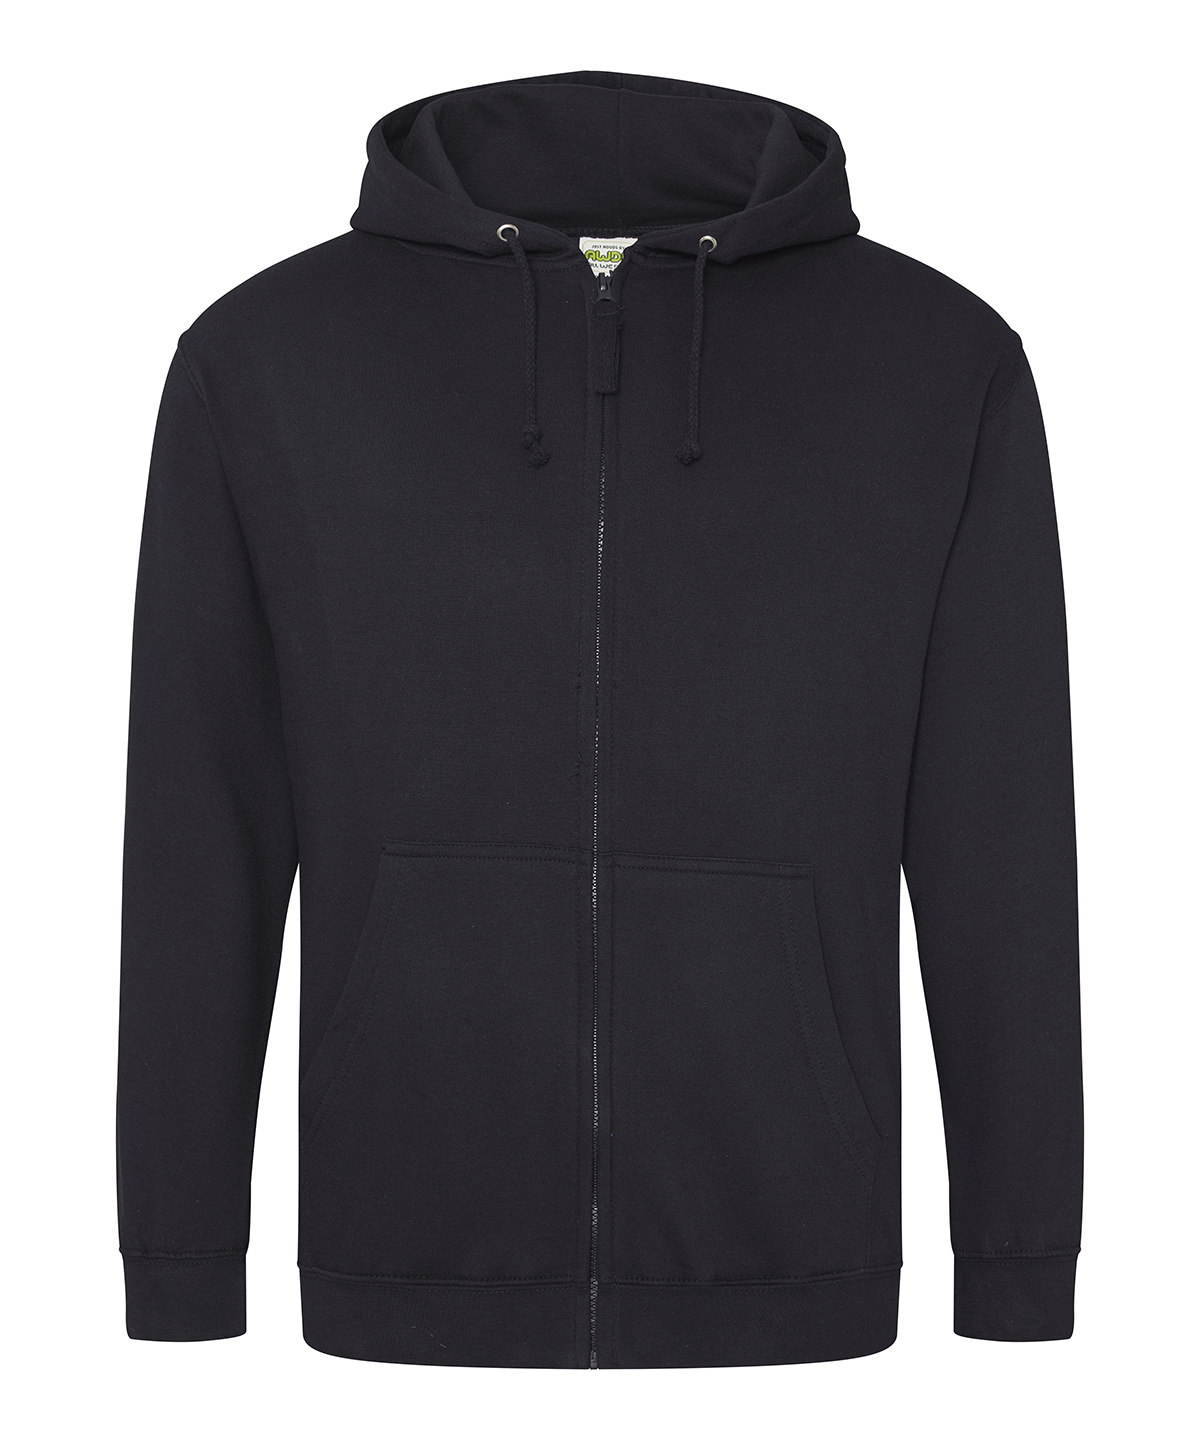 1st Hampden Park - Zipped Hoodie with Group Logo - The Dropped Stitch